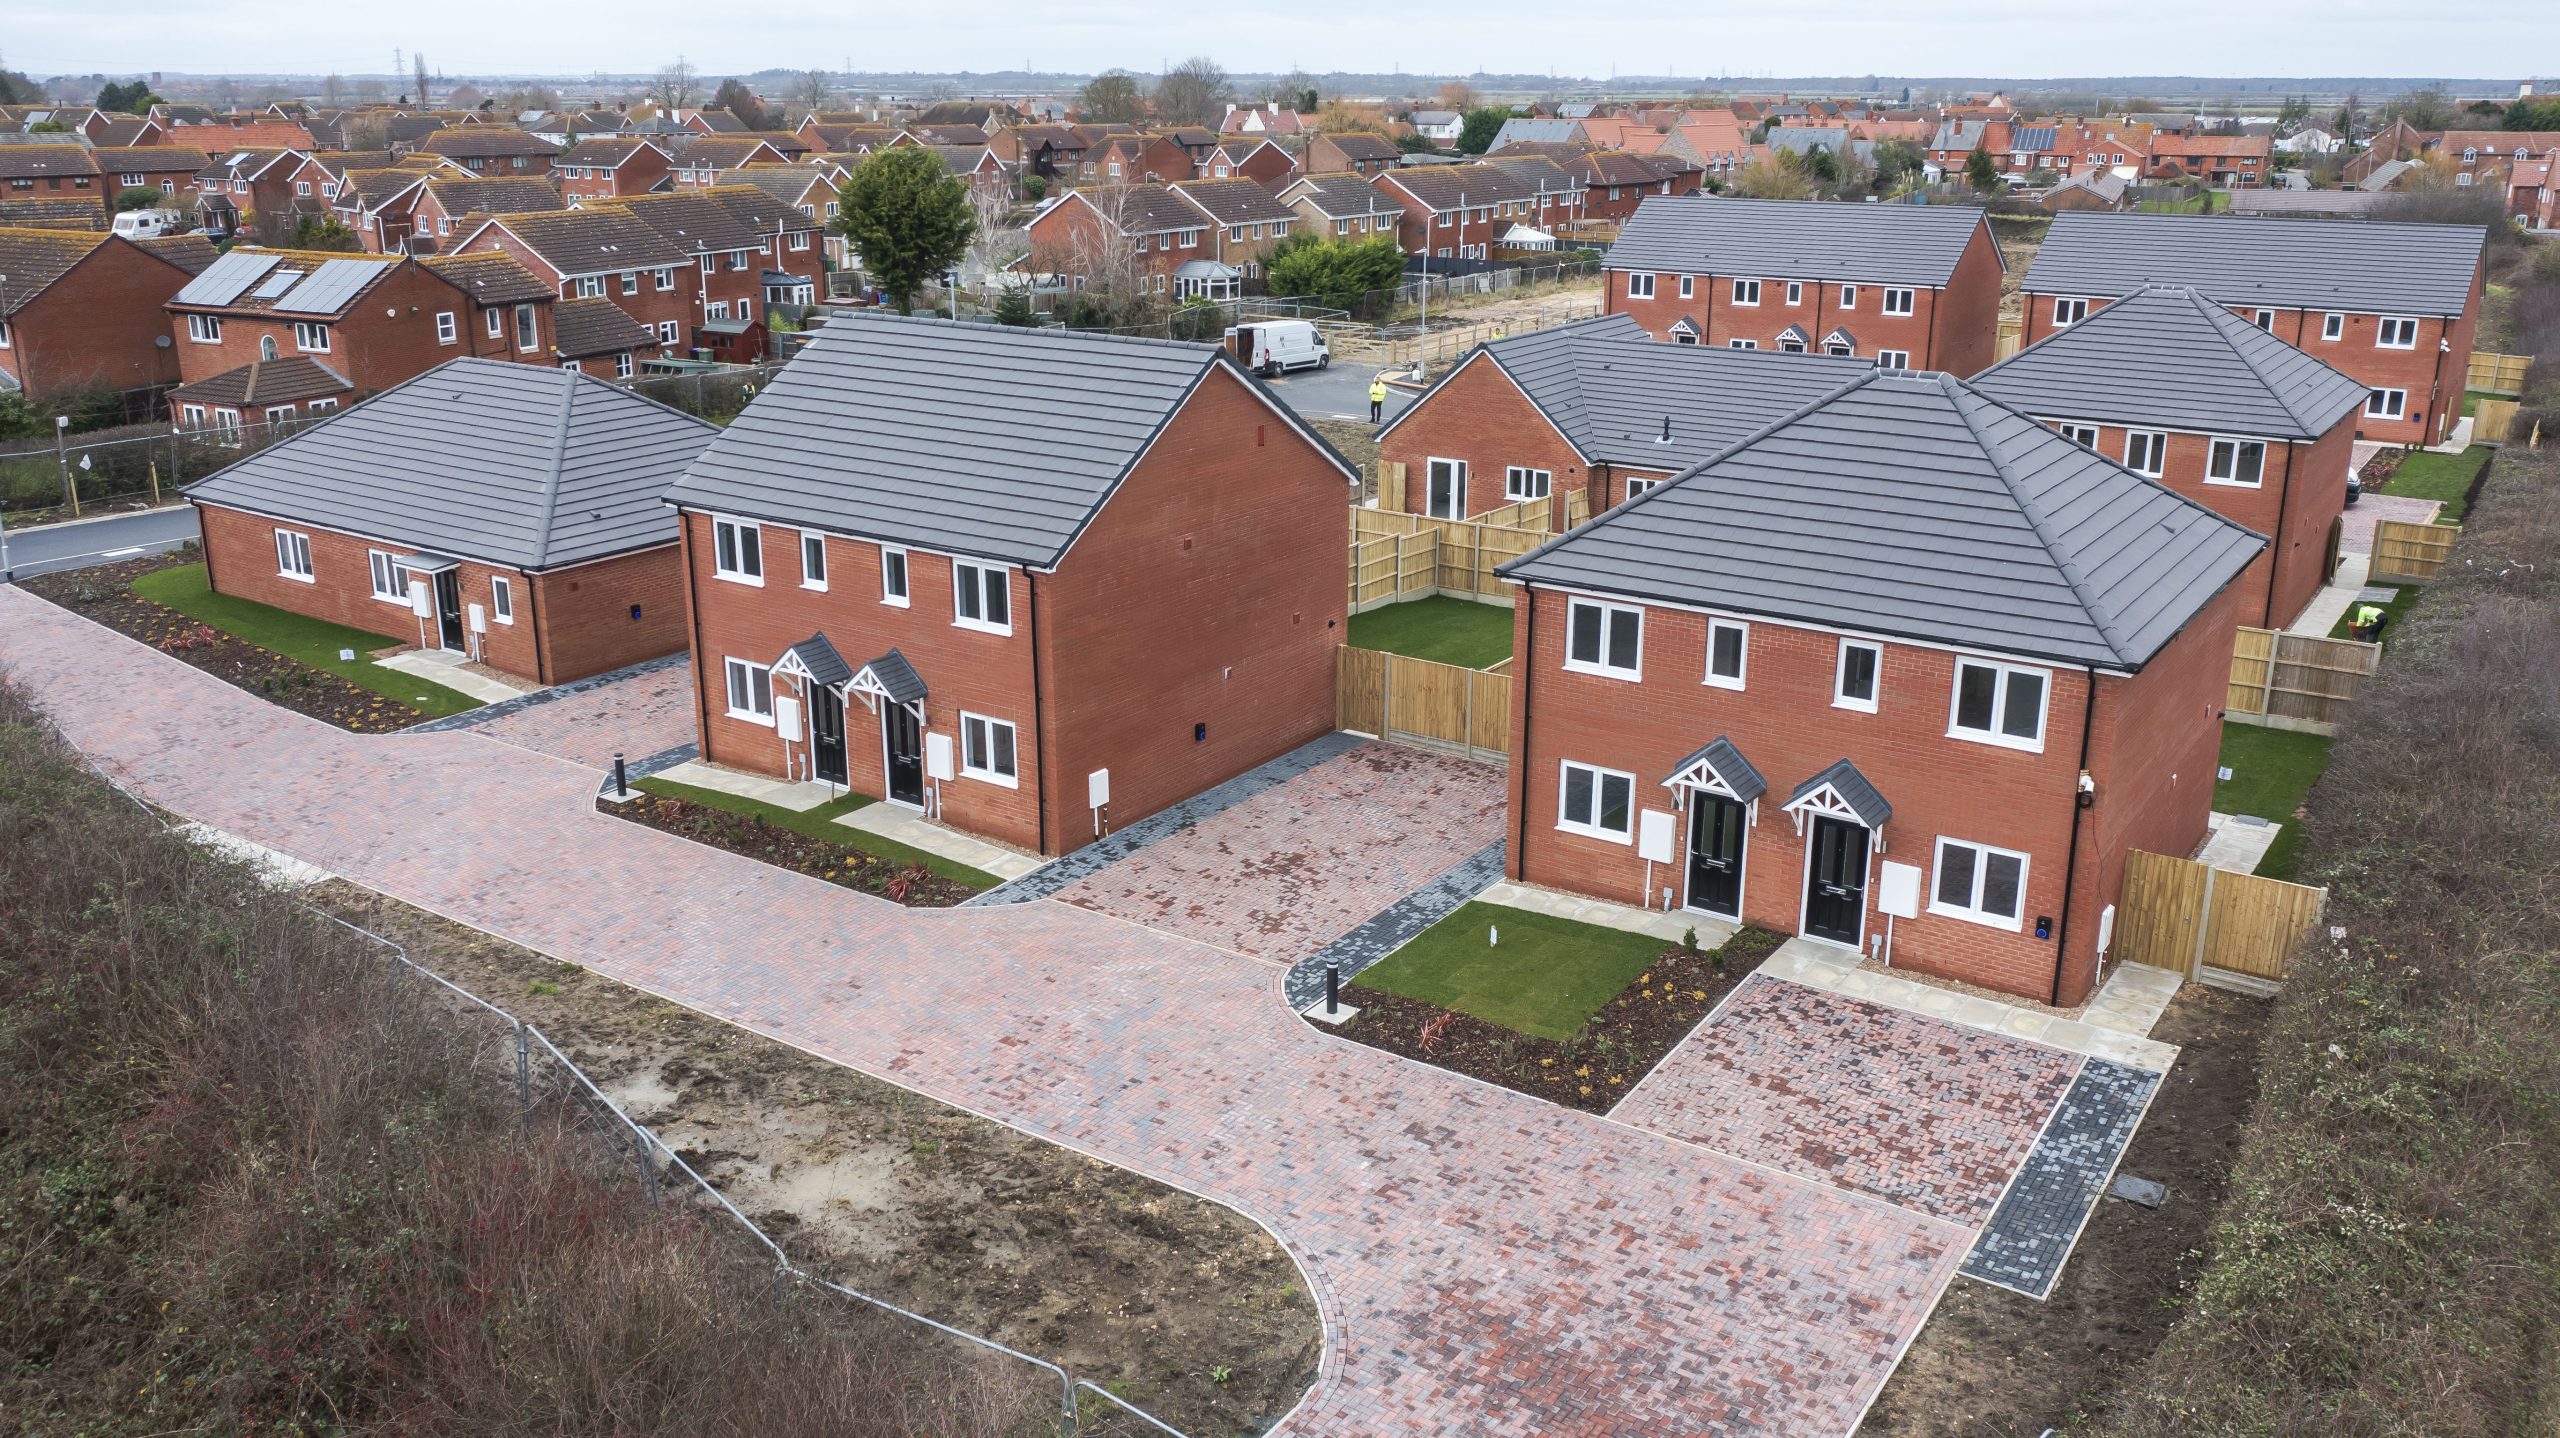 A new affordable housing development in Claypole has now been completed